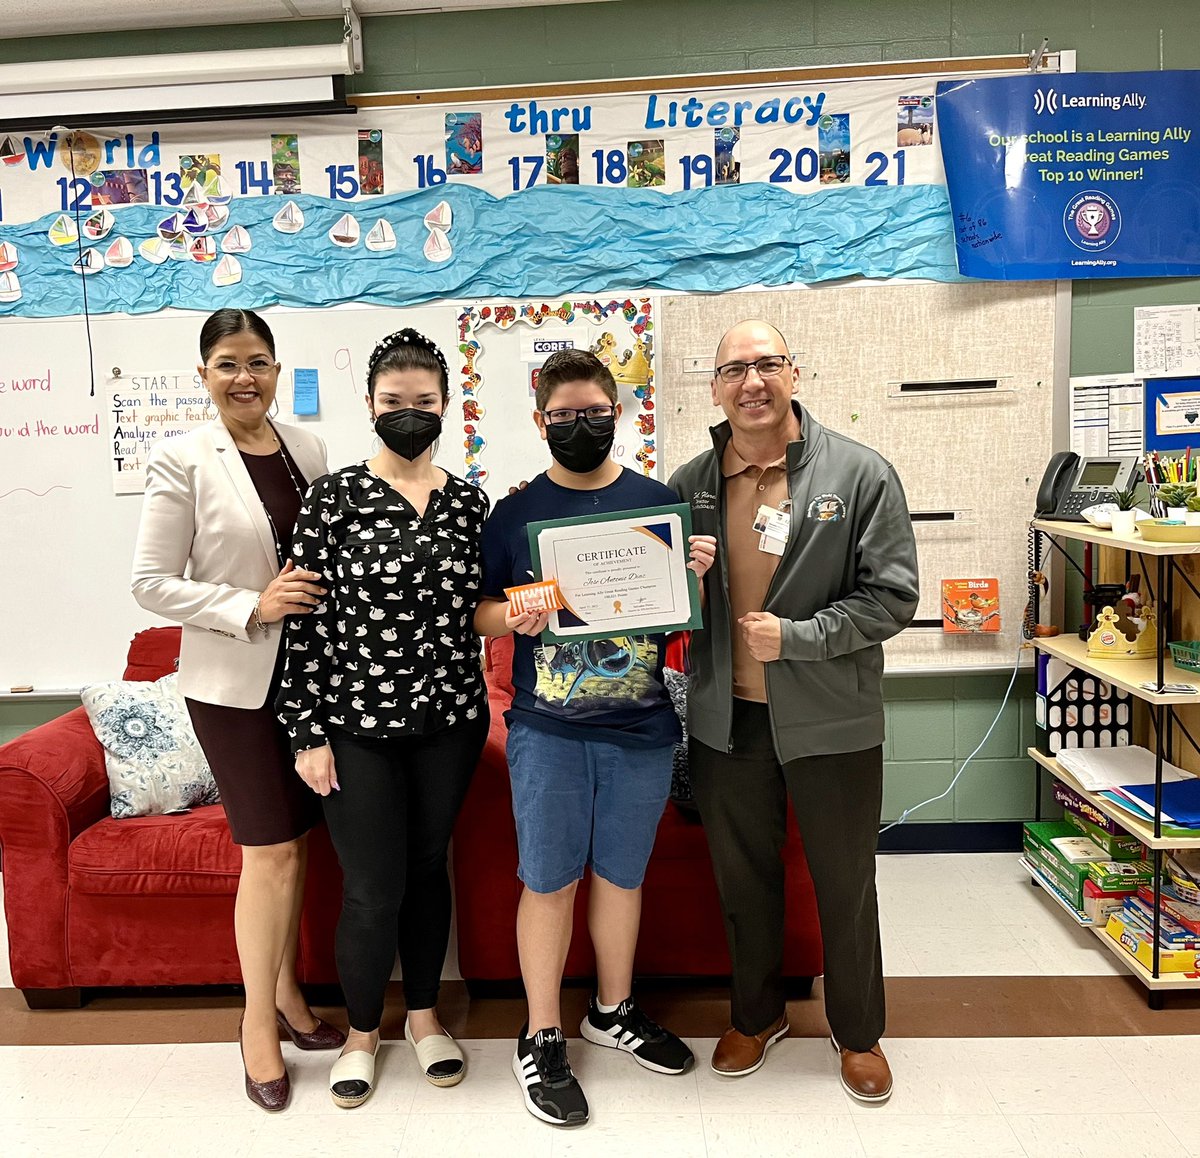 We would like to congratulate 🎉 Jose A. Diaz! @Learning_Ally The Great Reading Games CHAMPION. #nationalcompetition #goalsetting @salflores10 @vdelgado322 @perezpioneers #pioneerpride💚💙 @NancyBa72957929